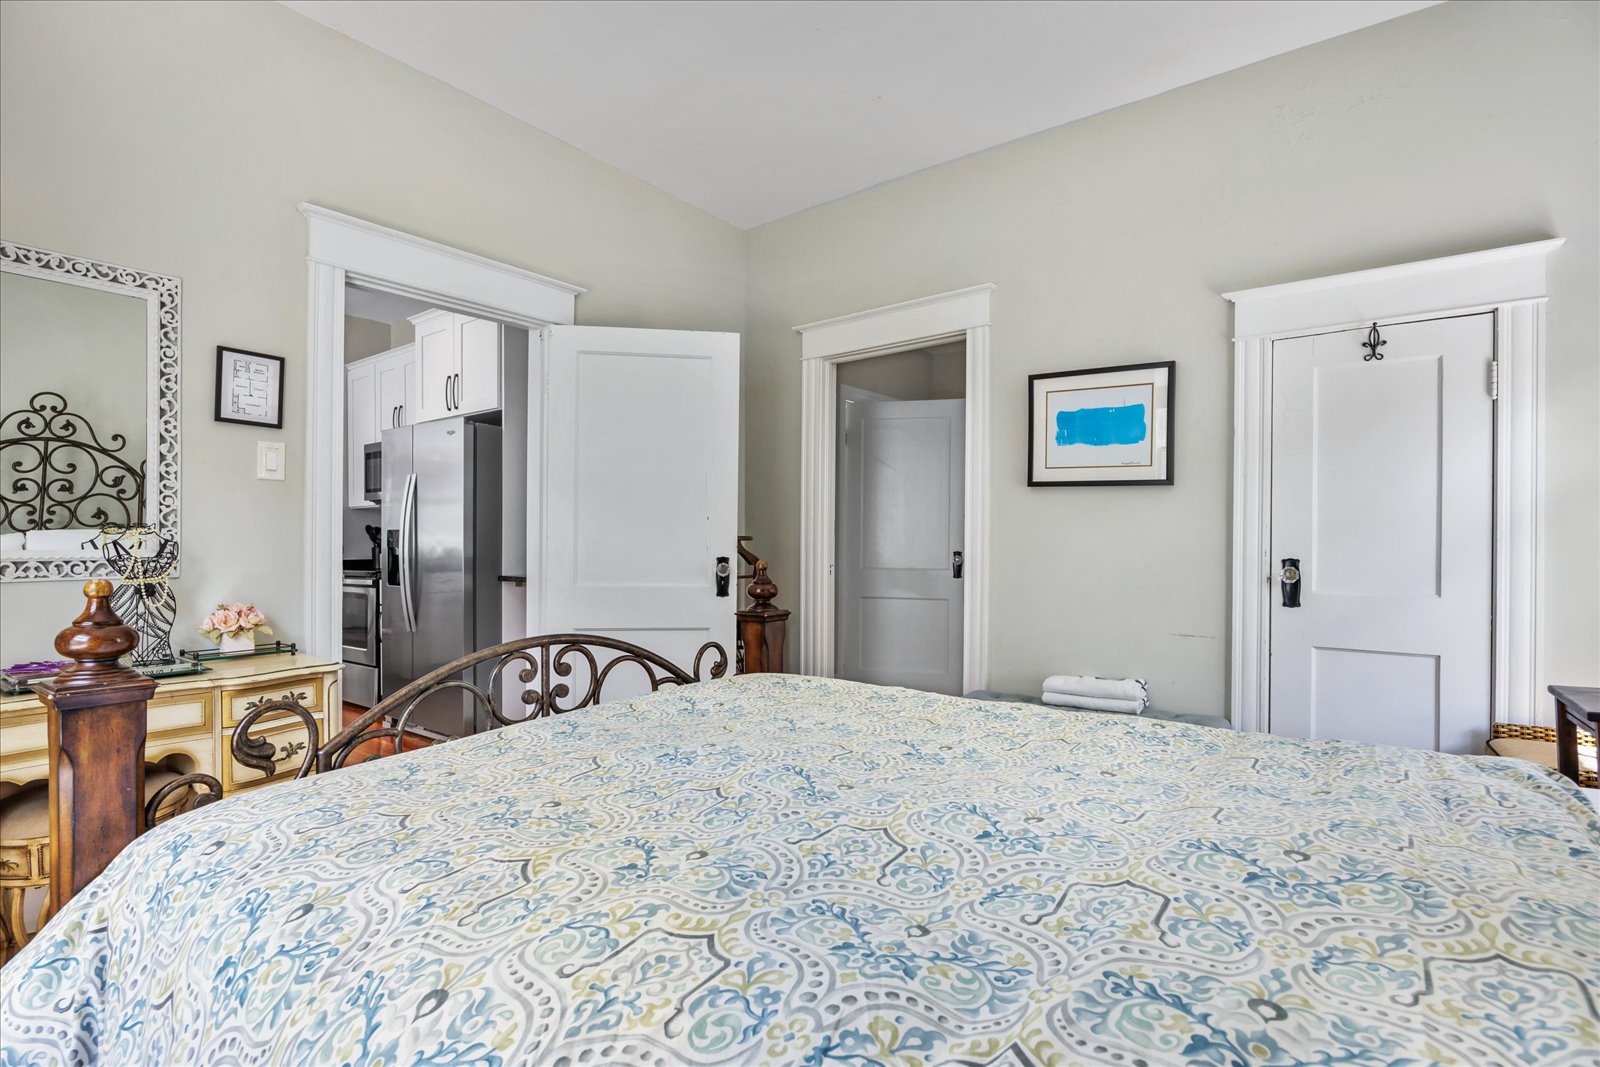 The master bedroom offers a regal queen bed & large windows